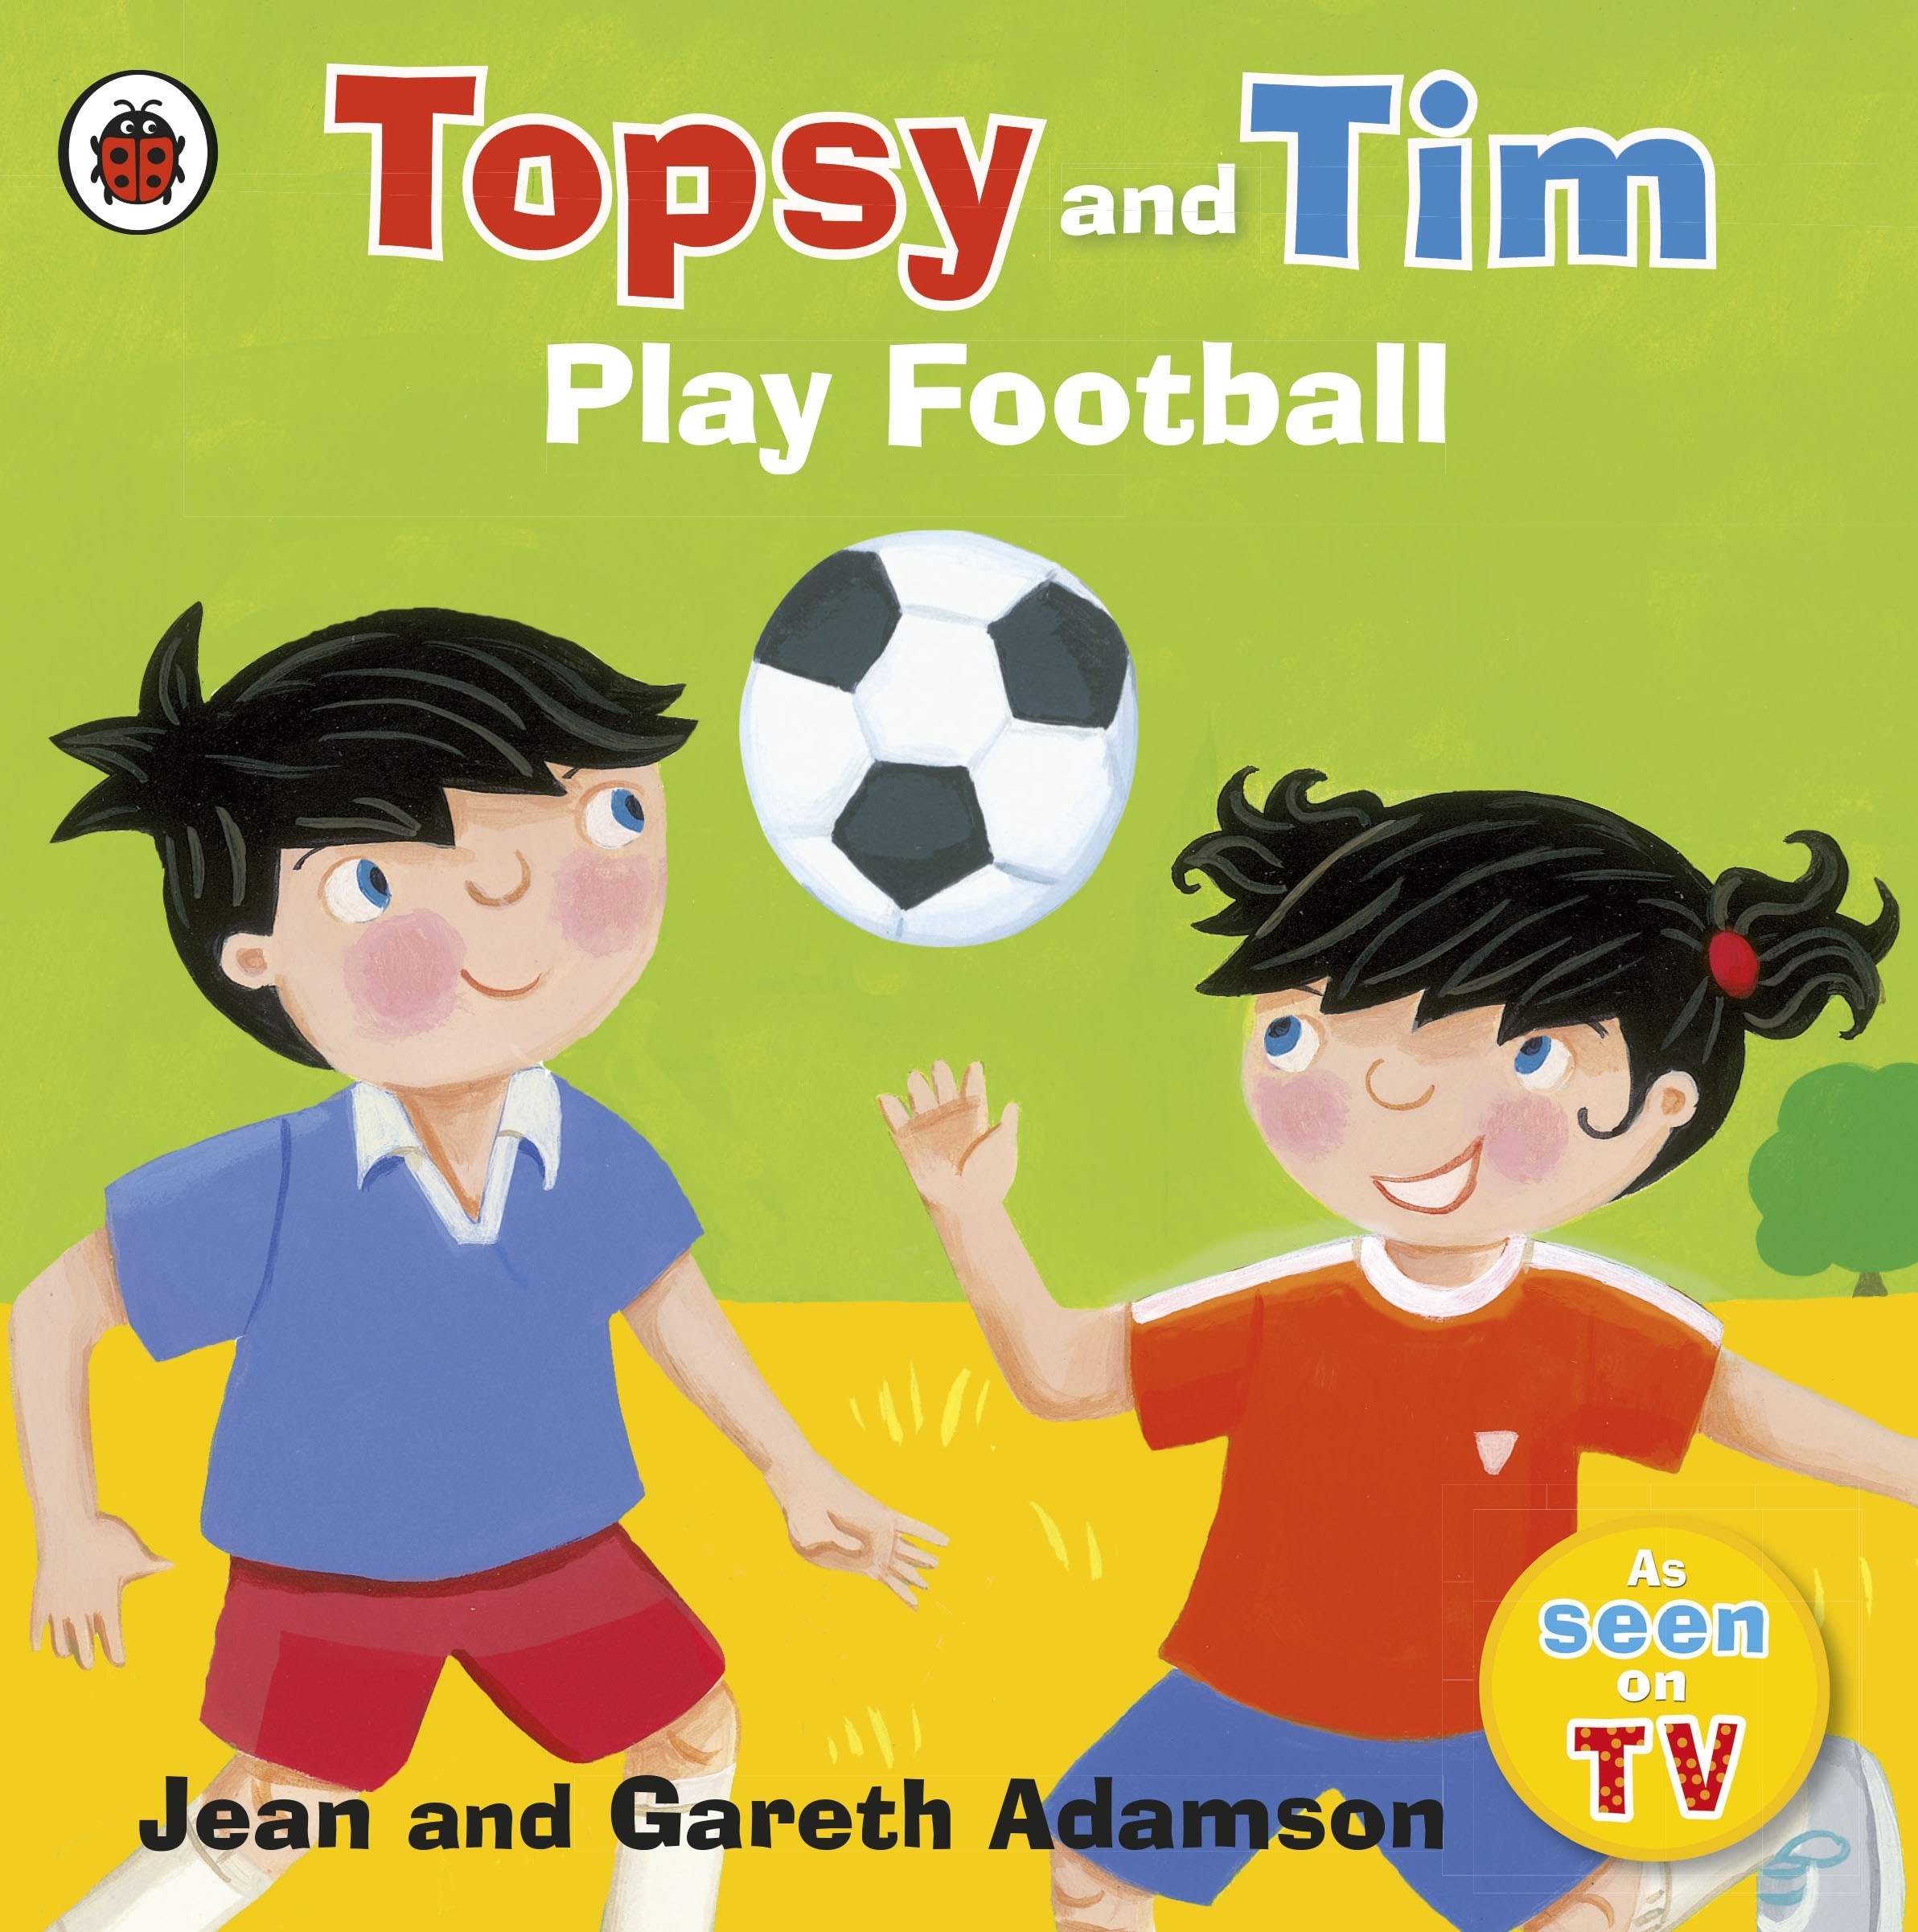 Book “Topsy and Tim: Play Football” by Jean Adamson — April 1, 2010